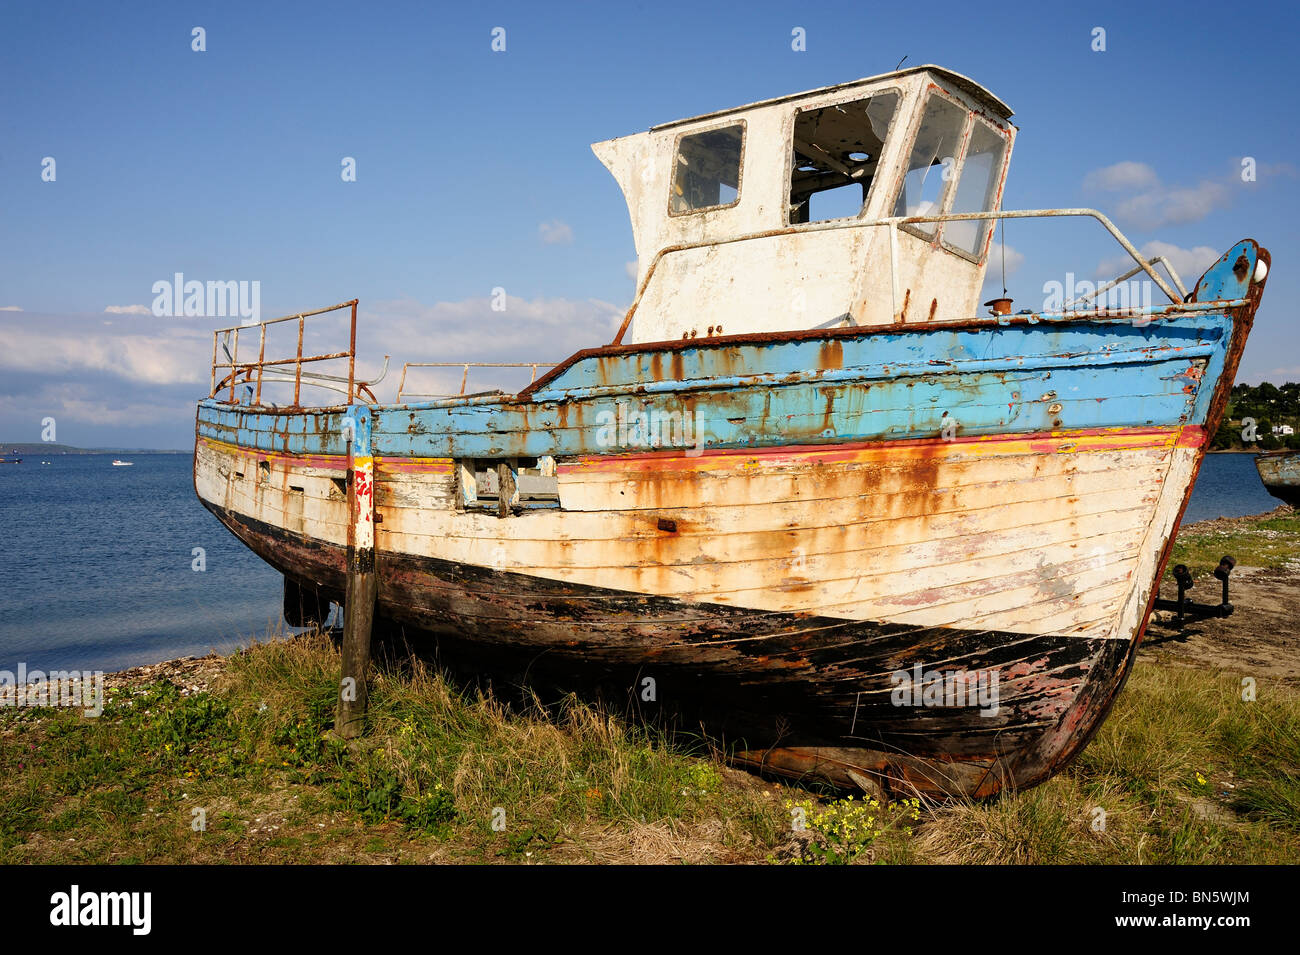 Derelict fishing boat, Le Fret, Crozon, Brittany, France Stock Photo